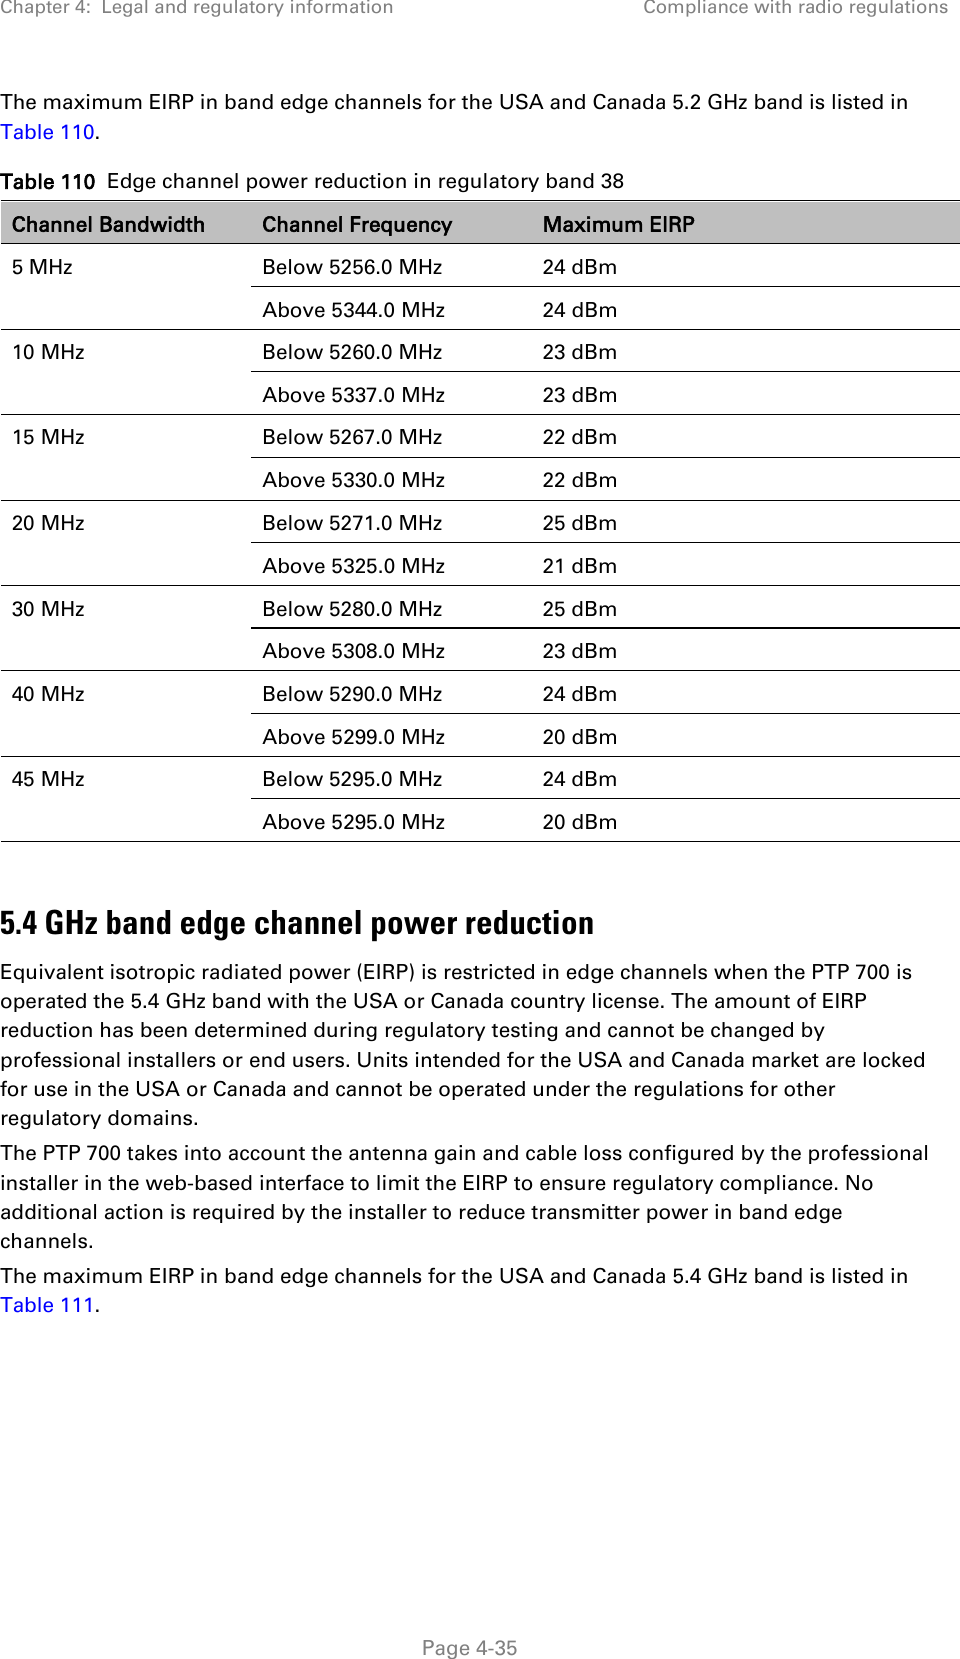 Chapter 4:  Legal and regulatory information Compliance with radio regulations  The maximum EIRP in band edge channels for the USA and Canada 5.2 GHz band is listed in Table 110. Table 110  Edge channel power reduction in regulatory band 38 Channel Bandwidth Channel Frequency Maximum EIRP 5 MHz Below 5256.0 MHz 24 dBm Above 5344.0 MHz 24 dBm 10 MHz Below 5260.0 MHz 23 dBm Above 5337.0 MHz 23 dBm 15 MHz Below 5267.0 MHz 22 dBm Above 5330.0 MHz 22 dBm 20 MHz Below 5271.0 MHz 25 dBm Above 5325.0 MHz  21 dBm 30 MHz Below 5280.0 MHz 25 dBm Above 5308.0 MHz  23 dBm 40 MHz Below 5290.0 MHz  24 dBm Above 5299.0 MHz 20 dBm 45 MHz Below 5295.0 MHz 24 dBm Above 5295.0 MHz 20 dBm  5.4 GHz band edge channel power reduction Equivalent isotropic radiated power (EIRP) is restricted in edge channels when the PTP 700 is operated the 5.4 GHz band with the USA or Canada country license. The amount of EIRP reduction has been determined during regulatory testing and cannot be changed by professional installers or end users. Units intended for the USA and Canada market are locked for use in the USA or Canada and cannot be operated under the regulations for other regulatory domains. The PTP 700 takes into account the antenna gain and cable loss configured by the professional installer in the web-based interface to limit the EIRP to ensure regulatory compliance. No additional action is required by the installer to reduce transmitter power in band edge channels. The maximum EIRP in band edge channels for the USA and Canada 5.4 GHz band is listed in Table 111.  Page 4-35 